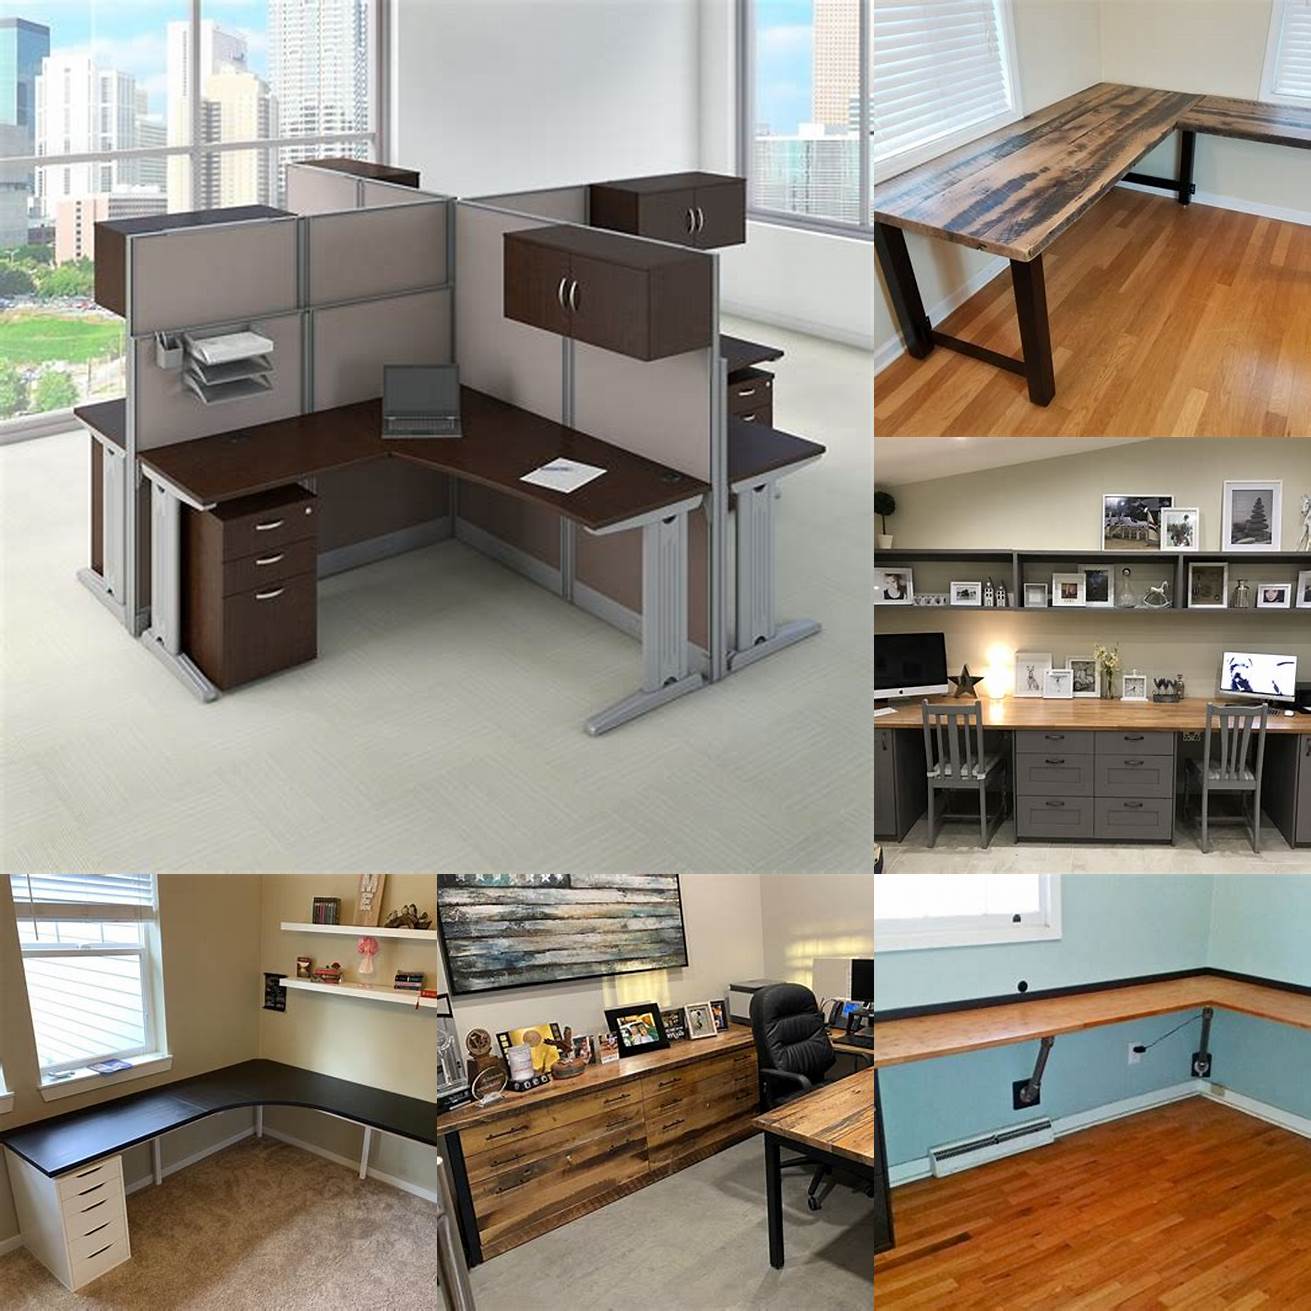 3 Lay out the boards in the desired desk shape